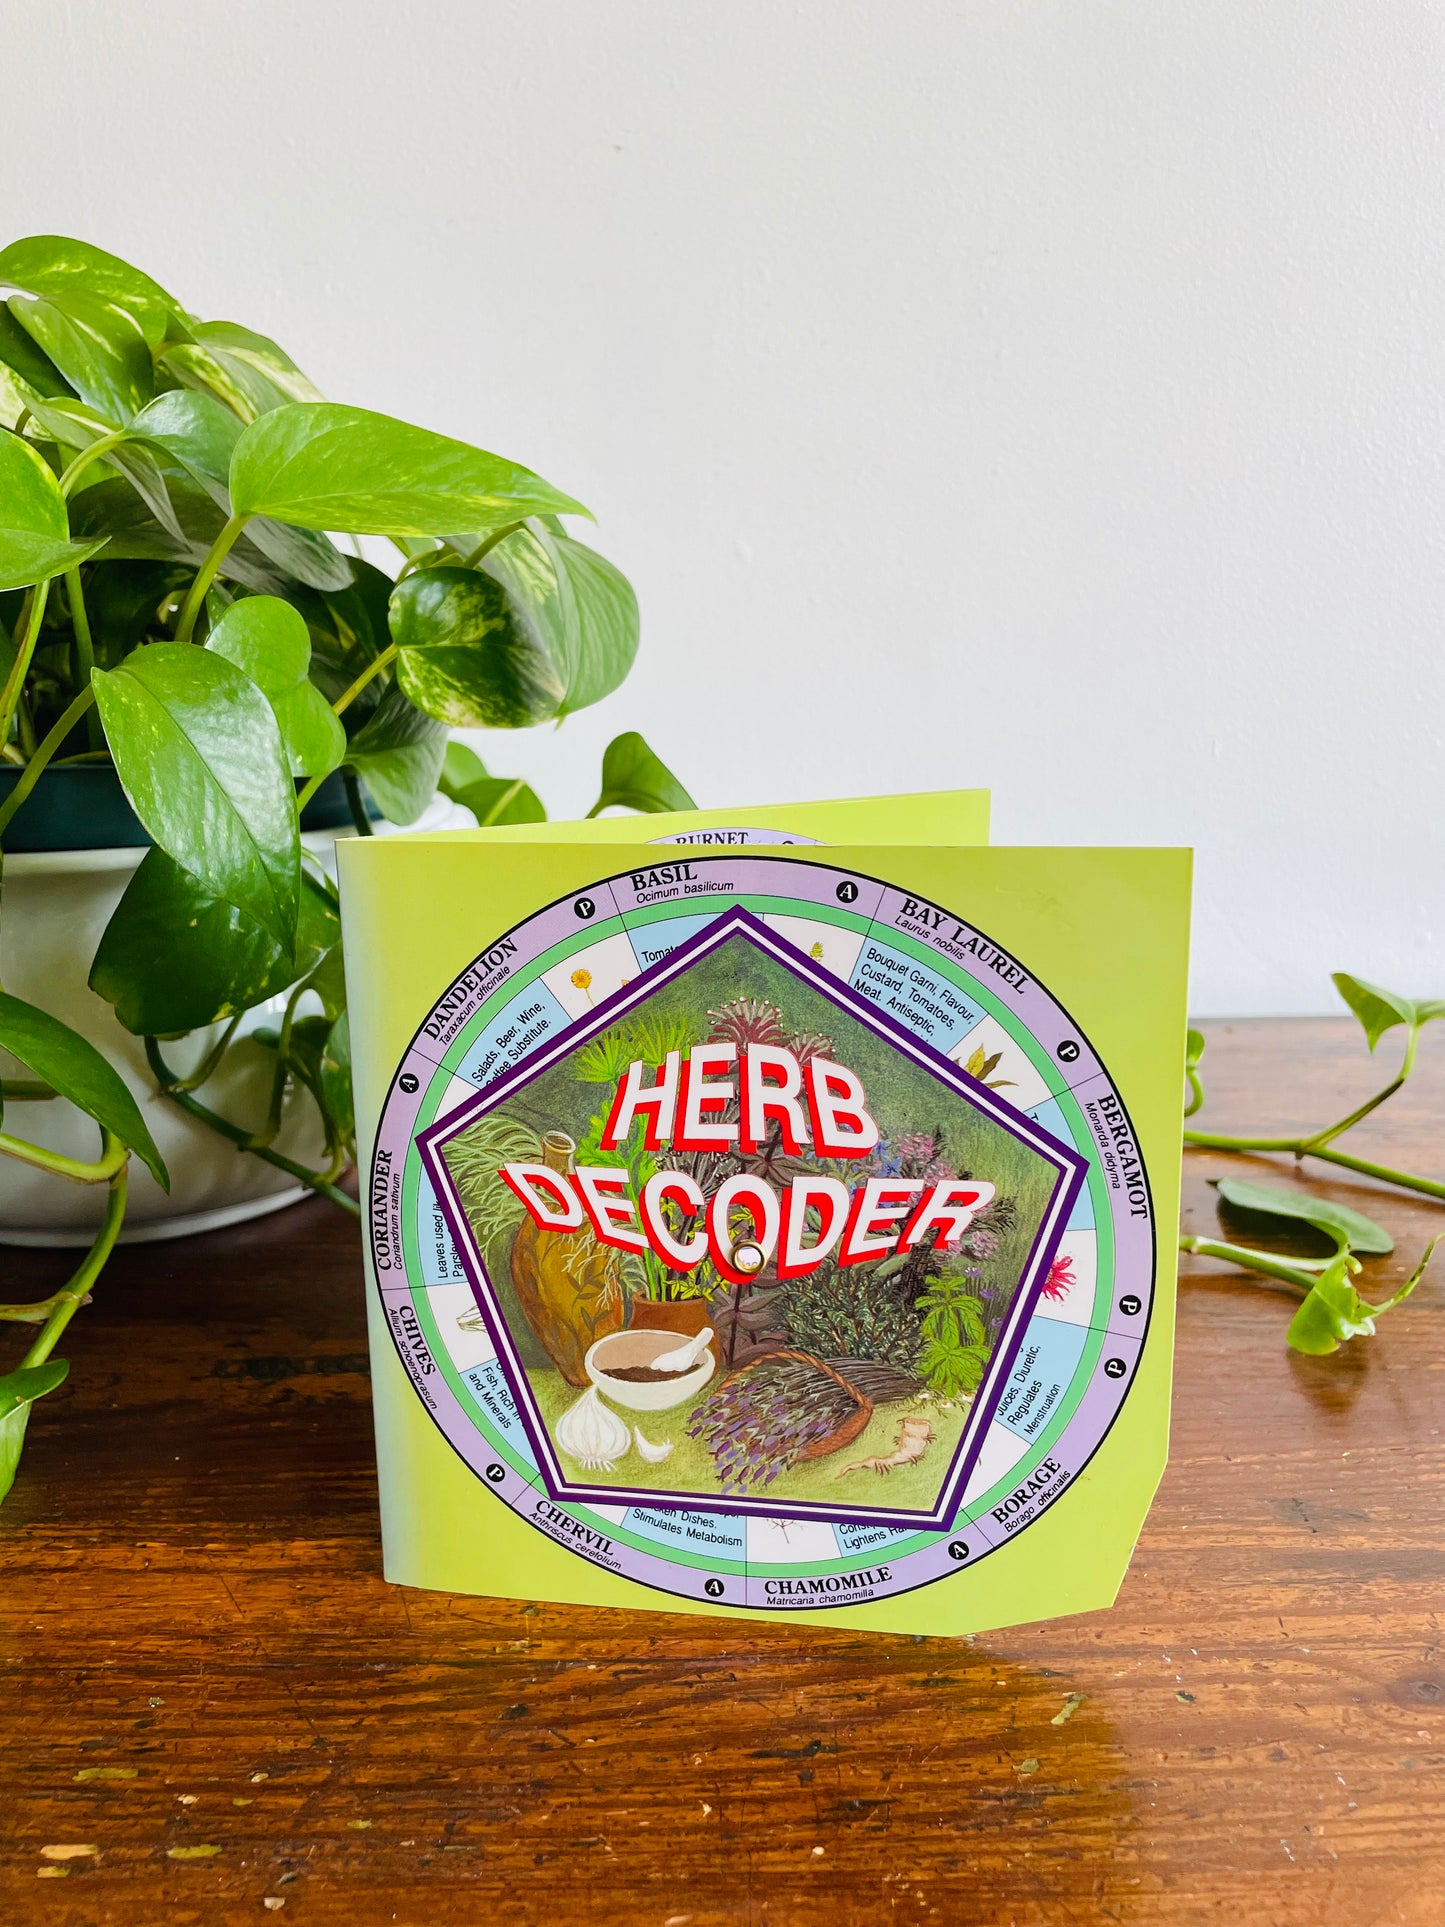 Herb Decoder by Dynamo House Melbourne Australia (1998) - 36 Herbs & Rotating Wheels with Information